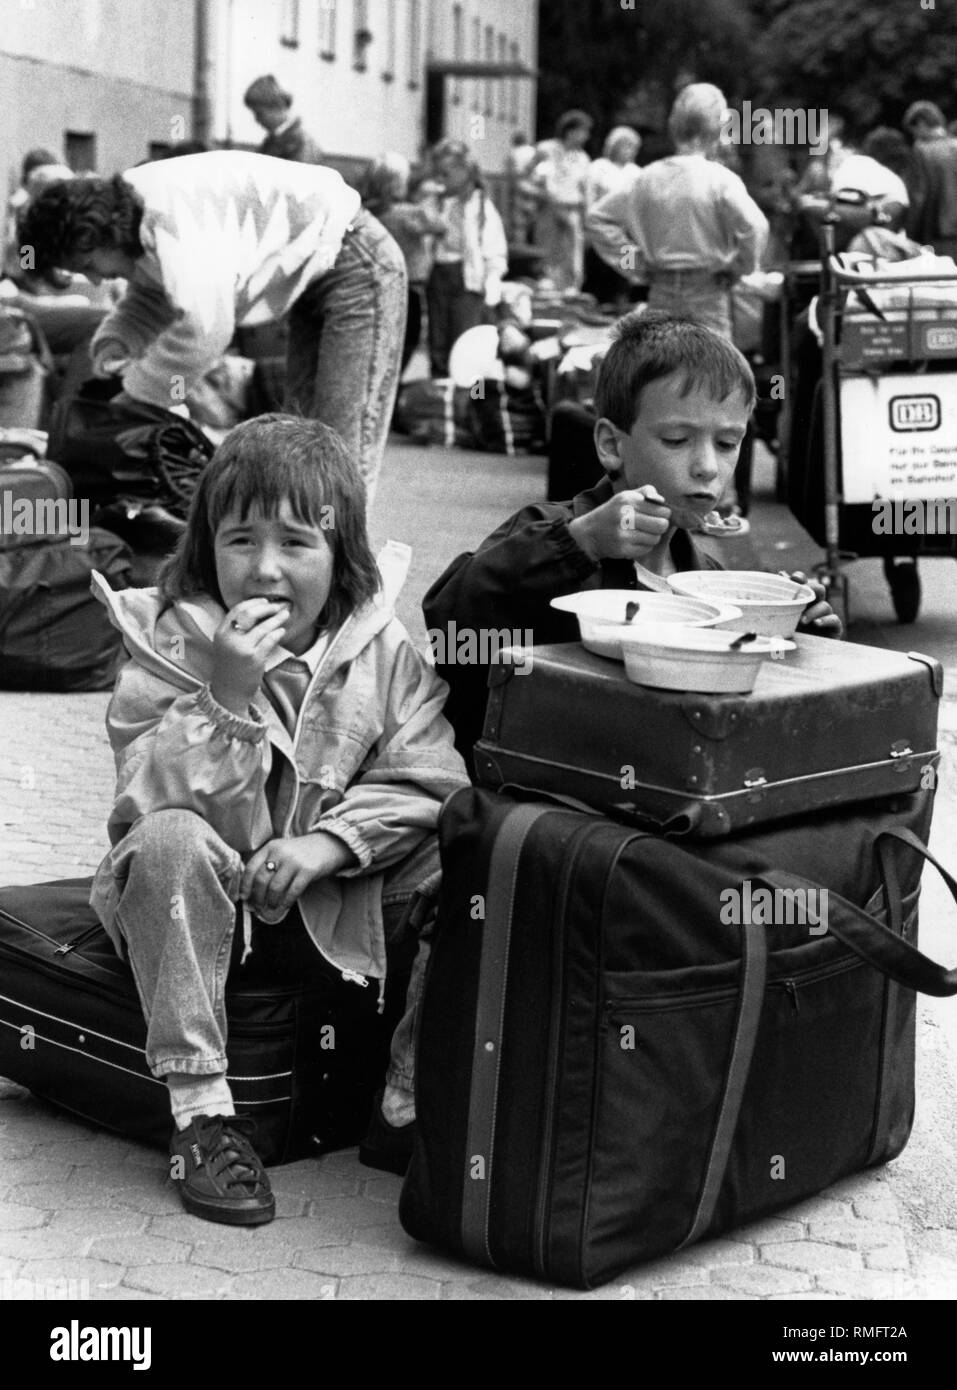 Refugees from the GDR in front of the Federal Reception Center in Giessen, where they are to be registered and receive their admission certificates. In the foreground two children are sitting on suitcases while having a meal. Stock Photo